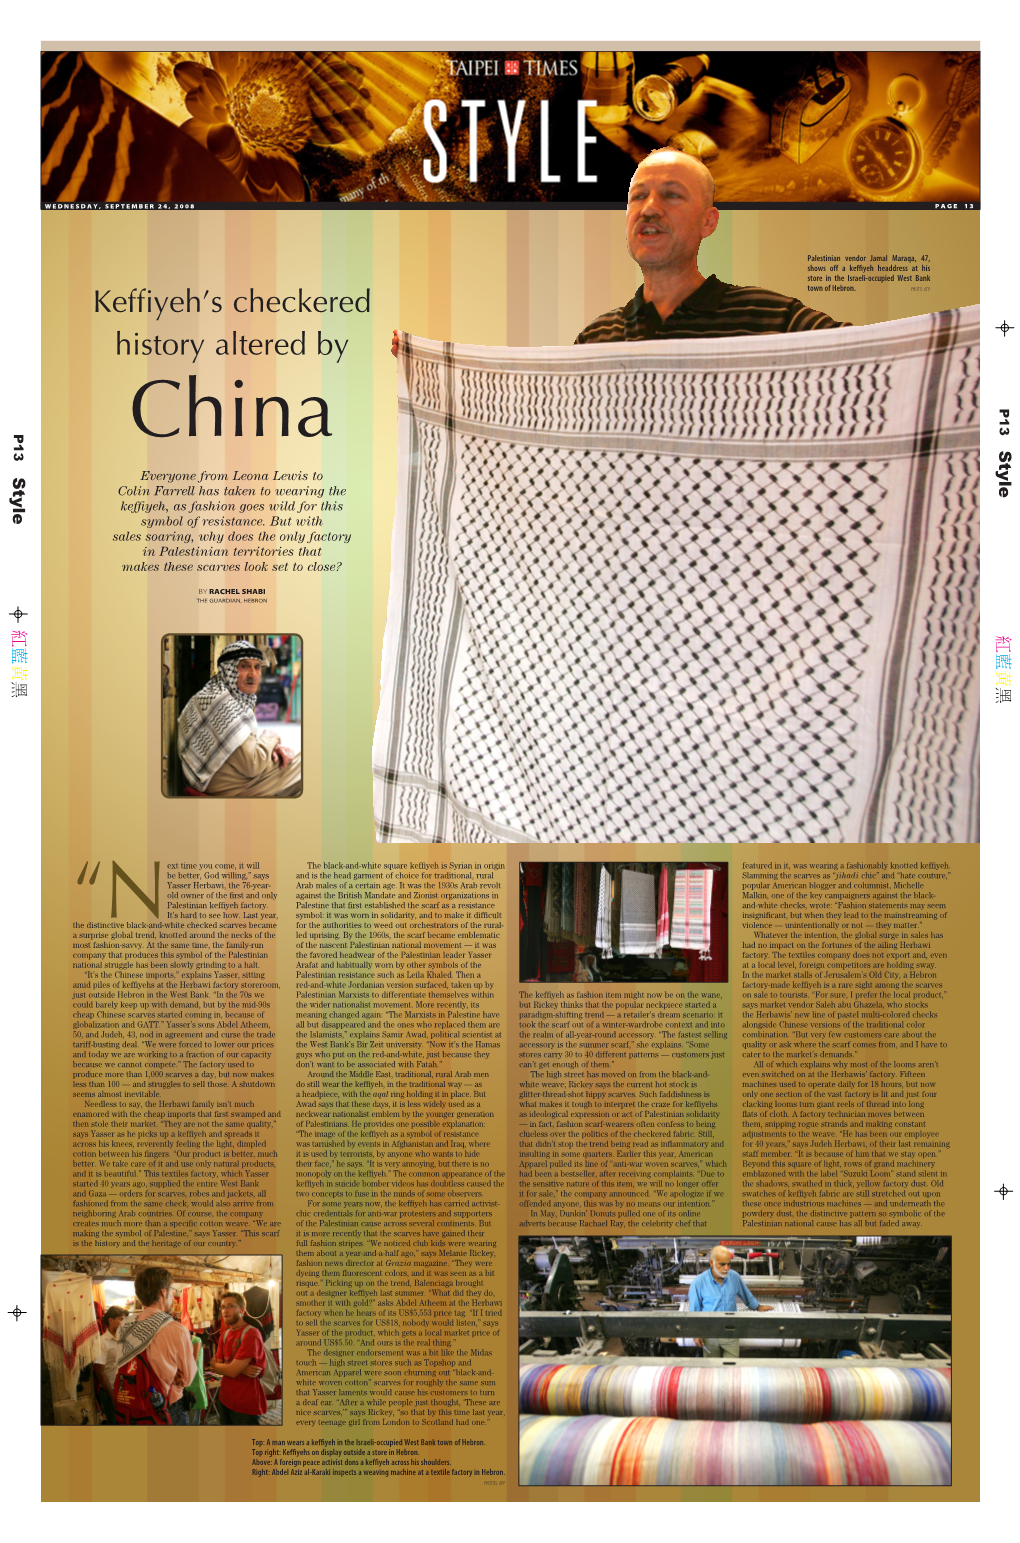 Keffiyeh's Checkered History Altered By